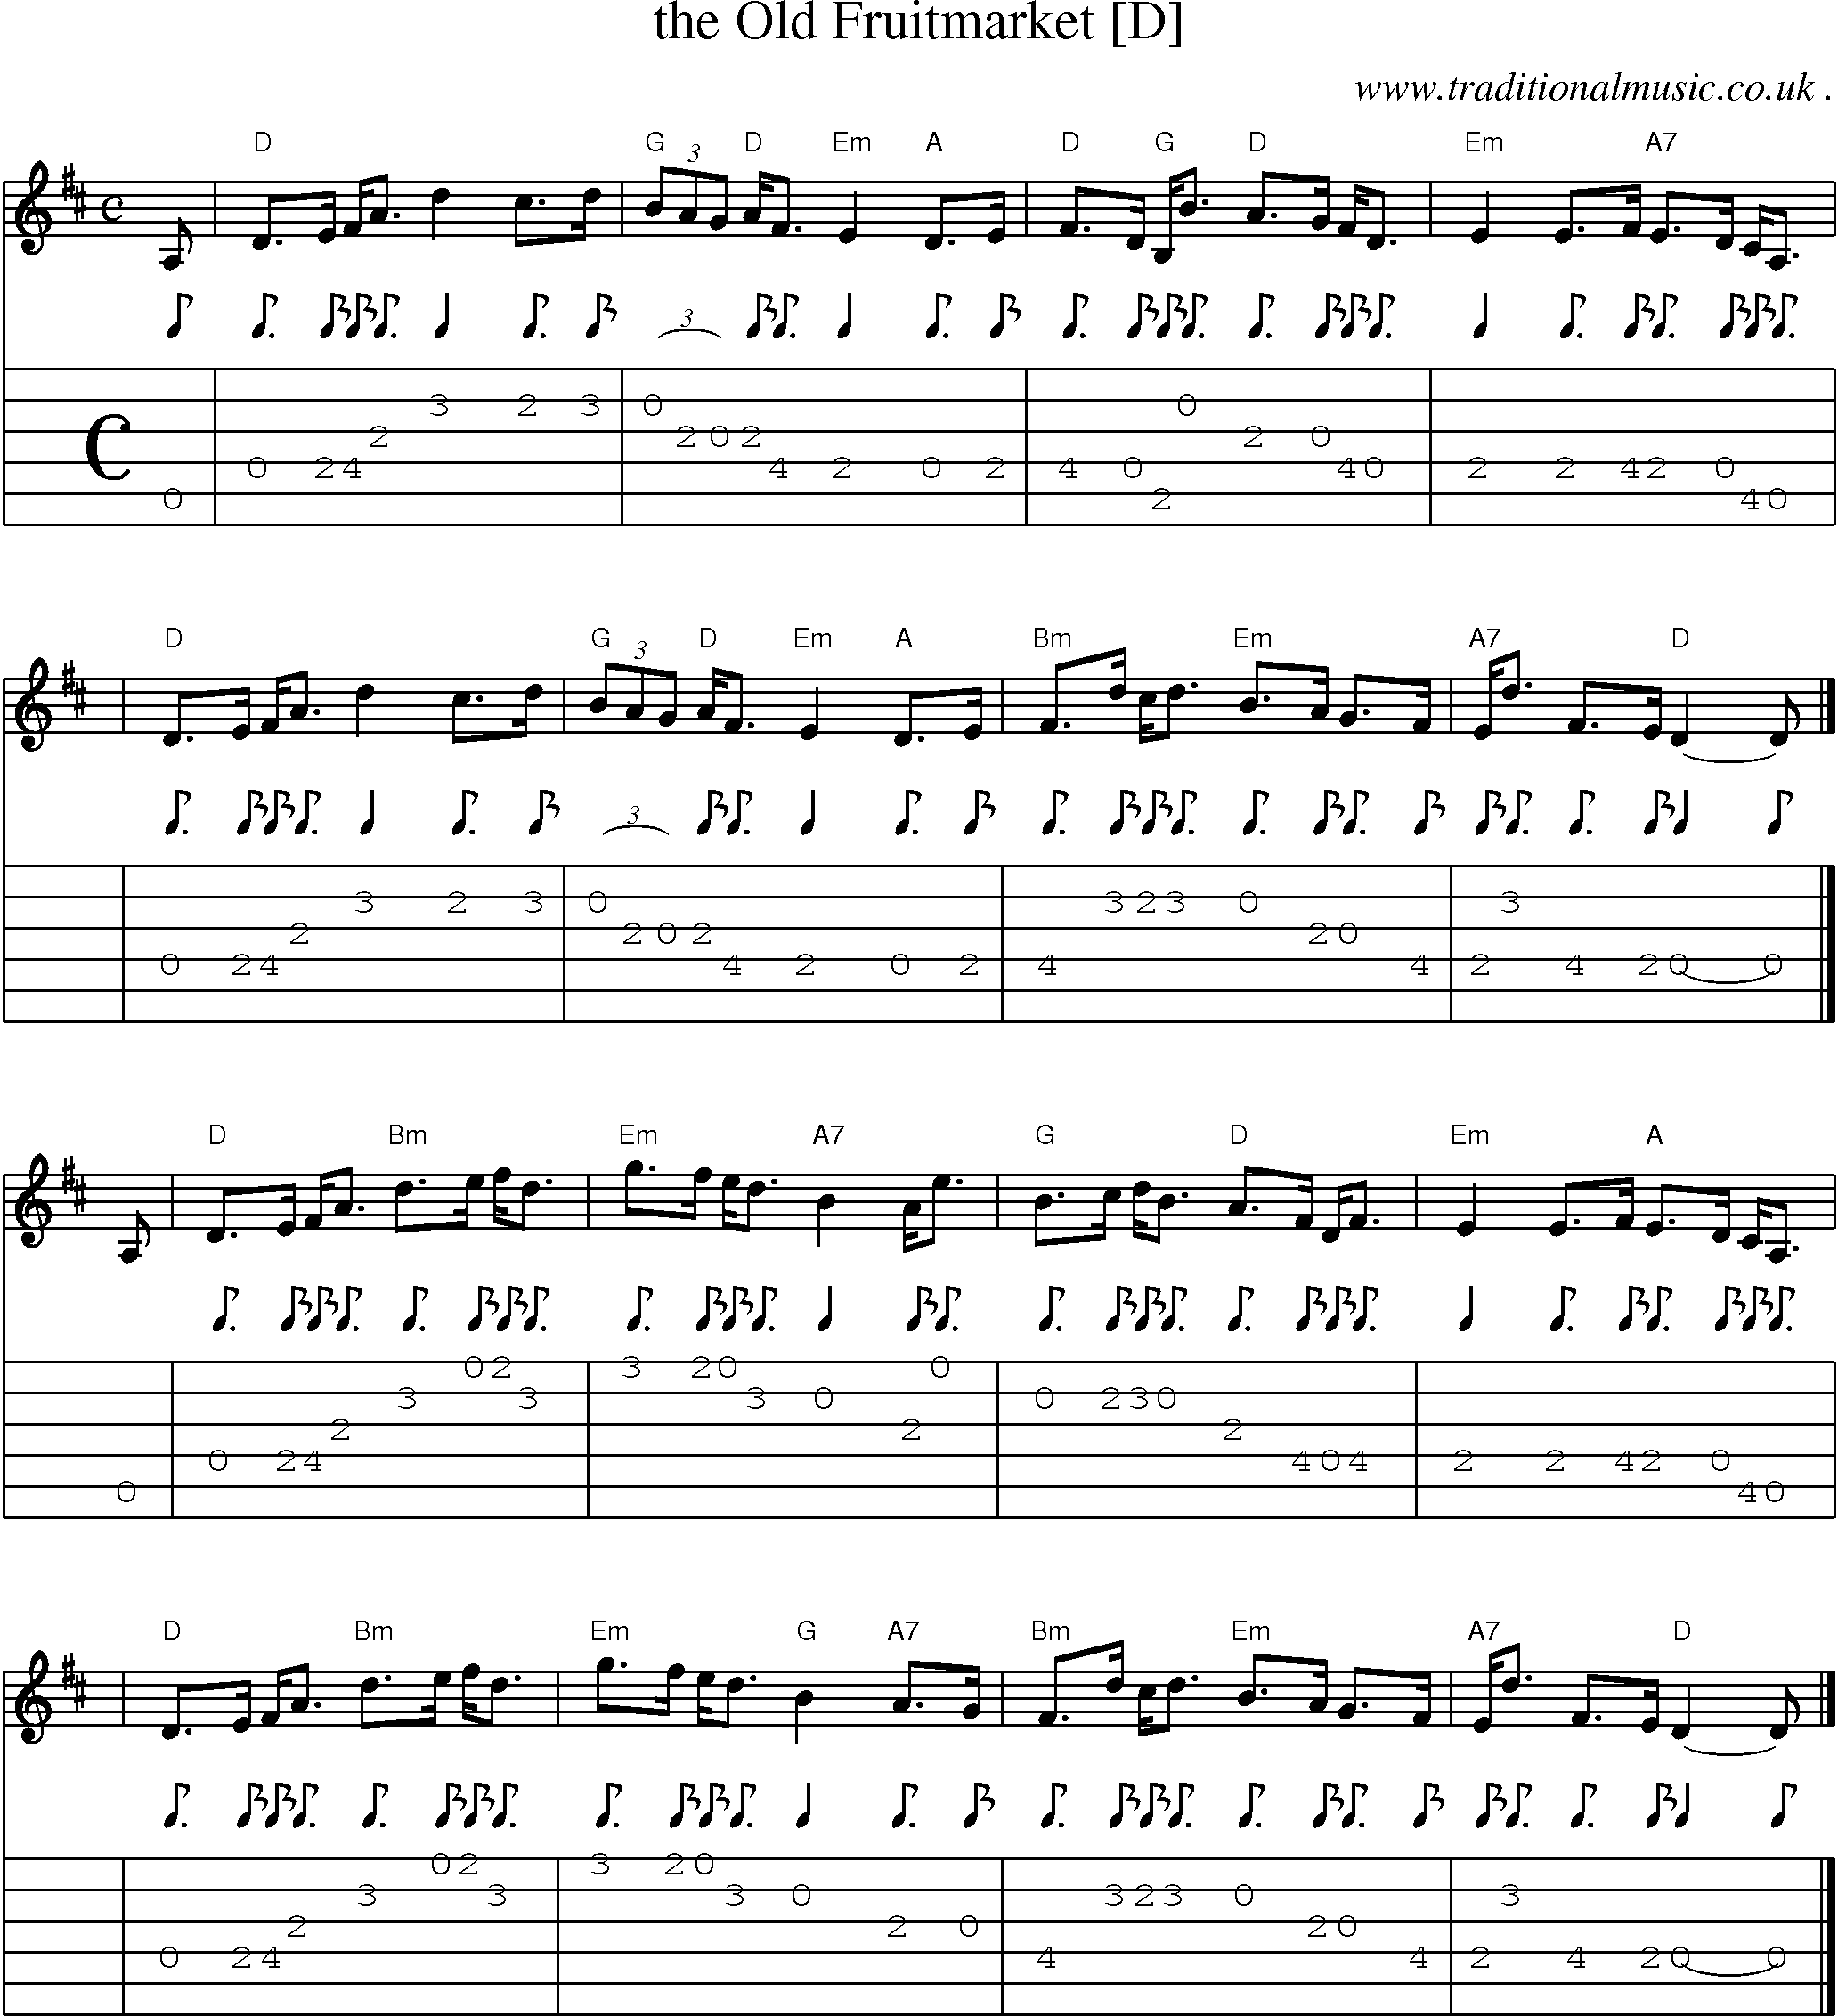 Sheet-music  score, Chords and Guitar Tabs for The Old Fruitmarket [d]